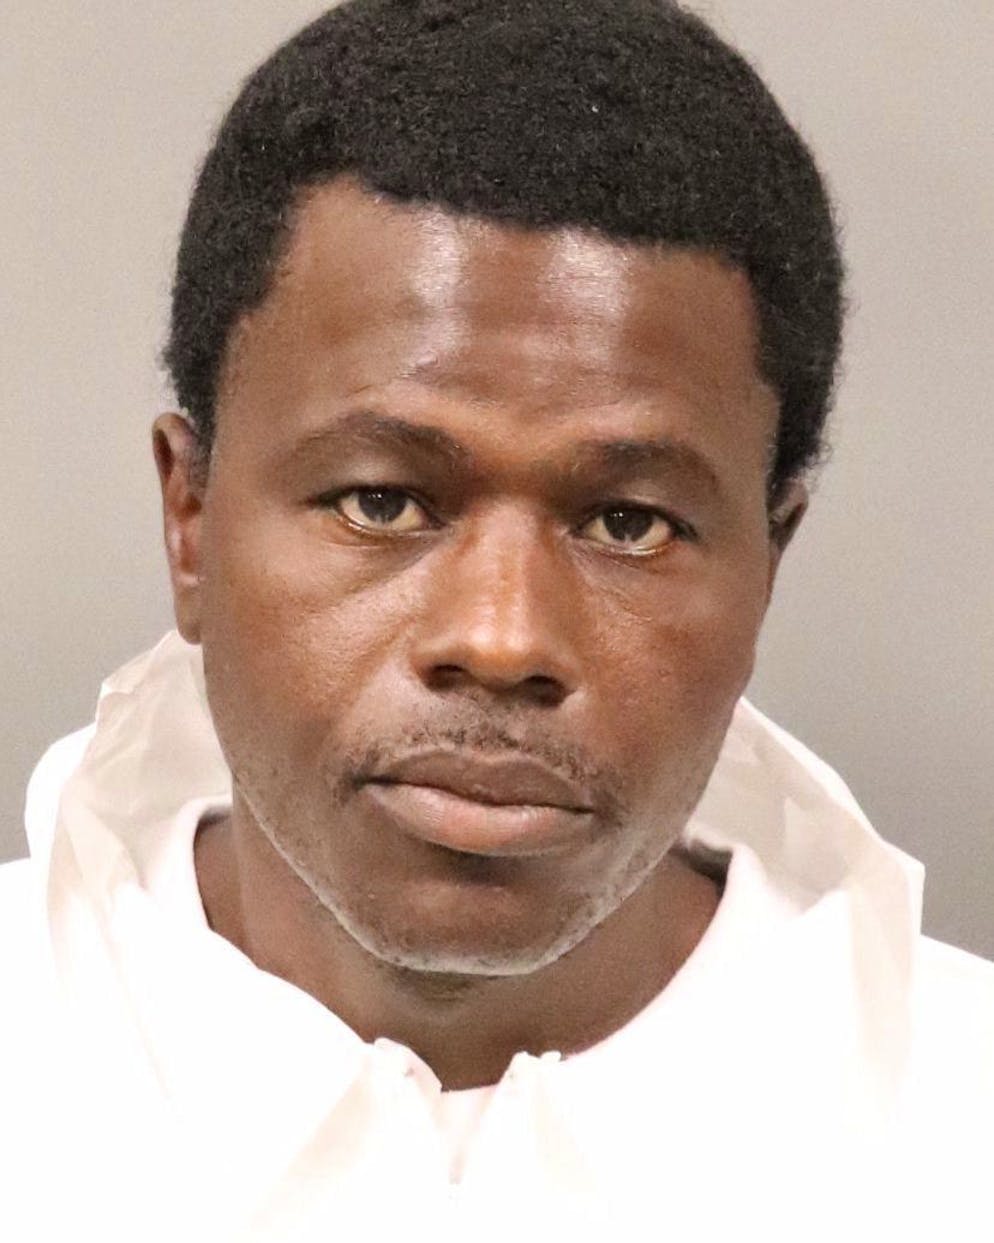 Serial killer in California.  A handout photo made available by the Stockton Police Department shows a photo of Wesley Brownlee, 43, who was arrested in Stockton, California, United States, on October 15, 2022, in connection with a series of homicides during of which six men were shot dead and one woman was injured.